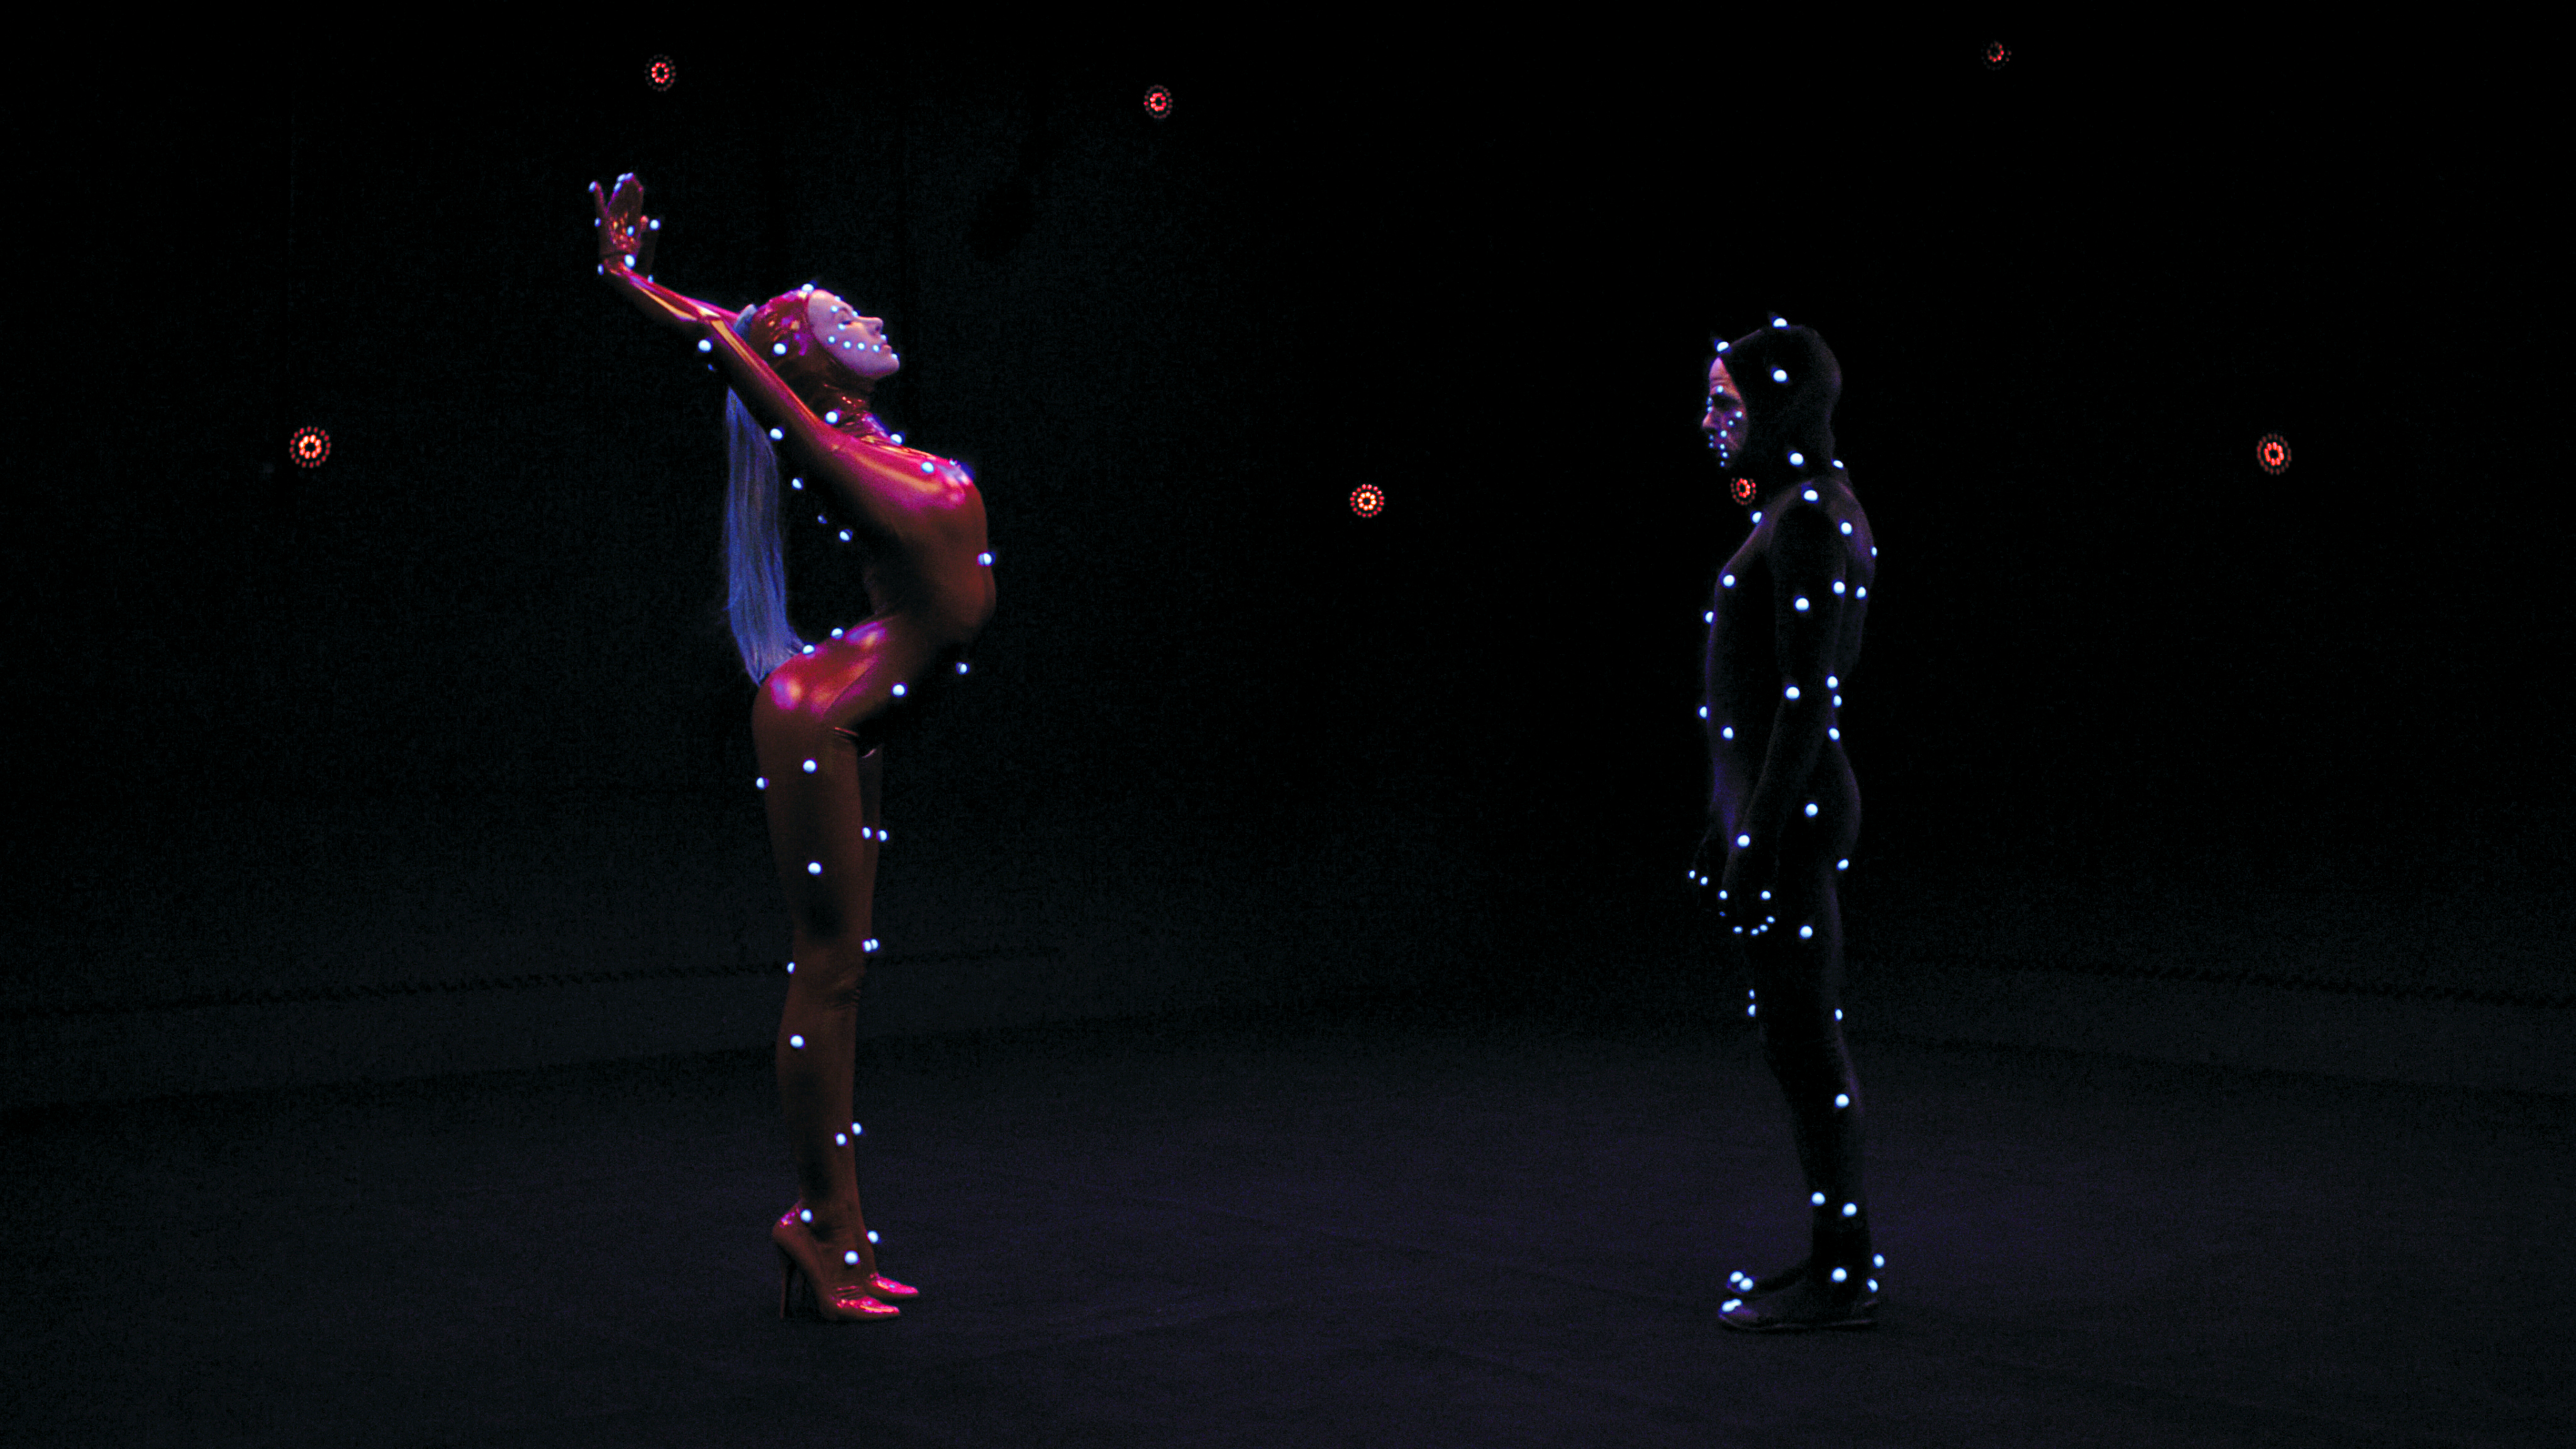 A brief history of motion capture